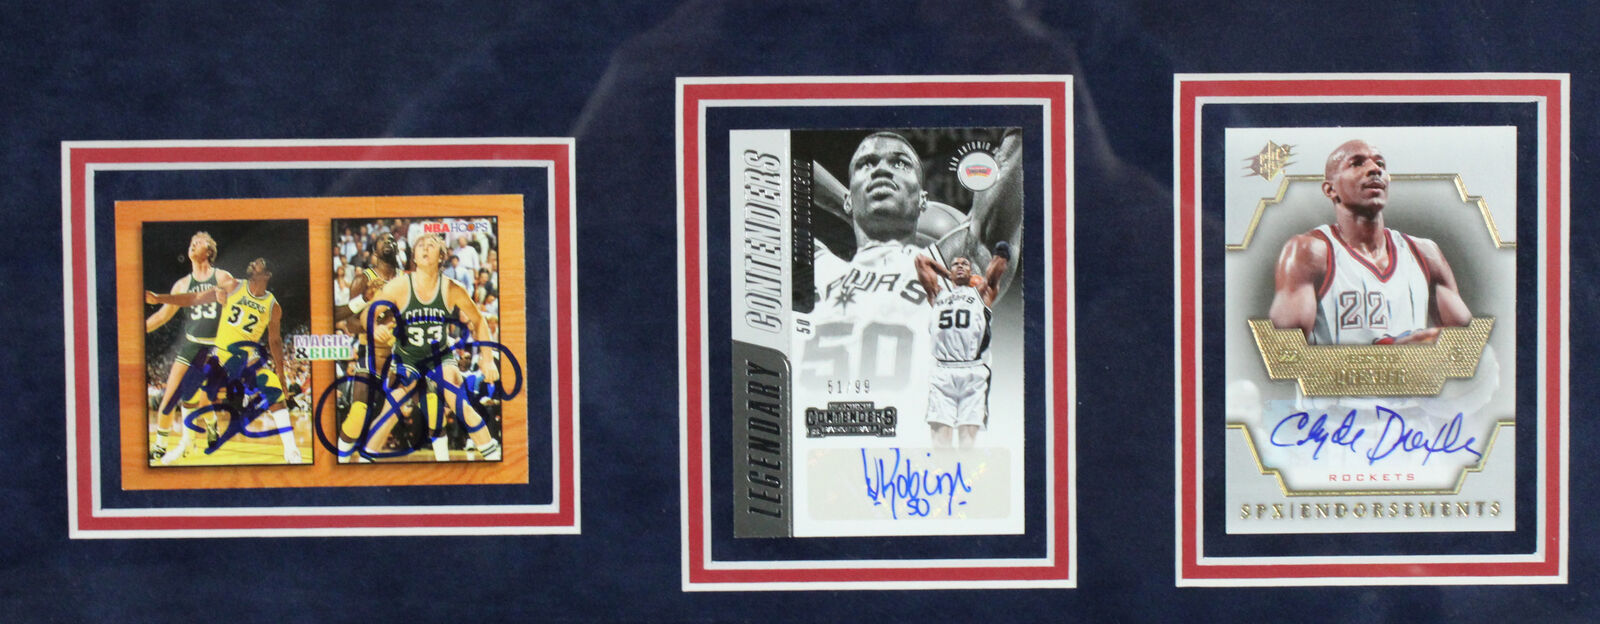 Dream Team-Signed, Game-Used Basketball Sells for World Record Price at SCP  Auctions